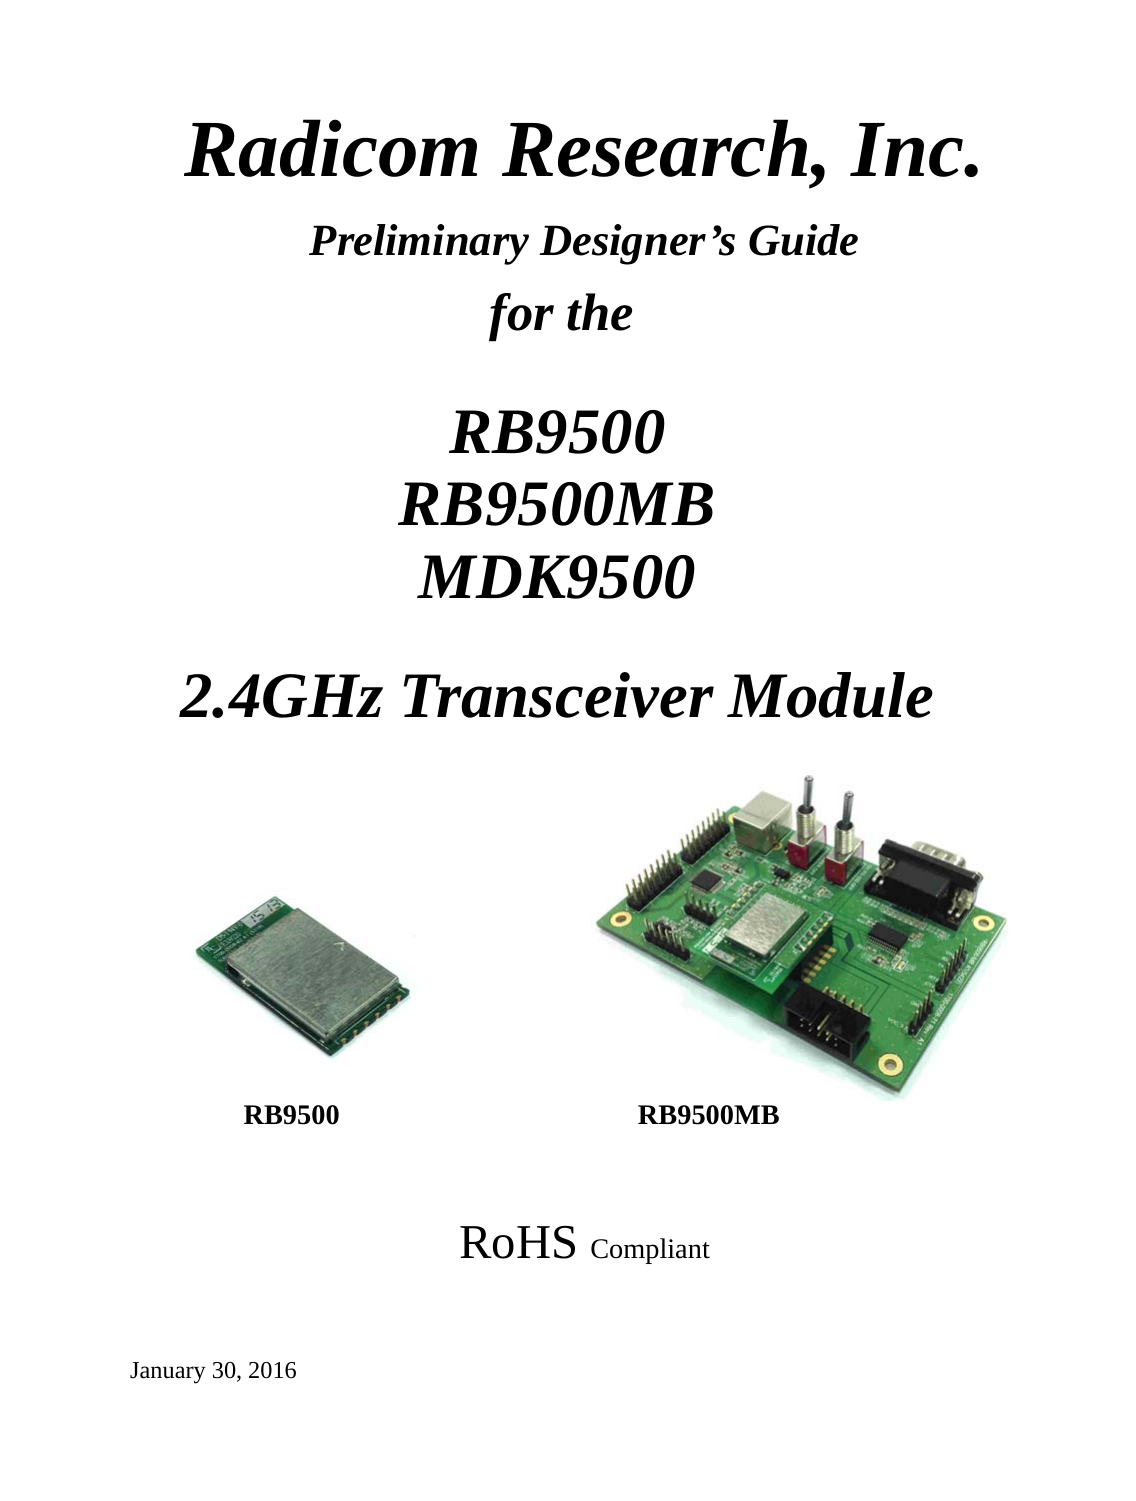 Radicom Research, Inc. Preliminary Designer’s Guide for the  RB9500 RB9500MB MDK9500  2.4GHz Transceiver Module                                          RB9500                     RB9500MB    RoHS Compliant   January 30, 2016